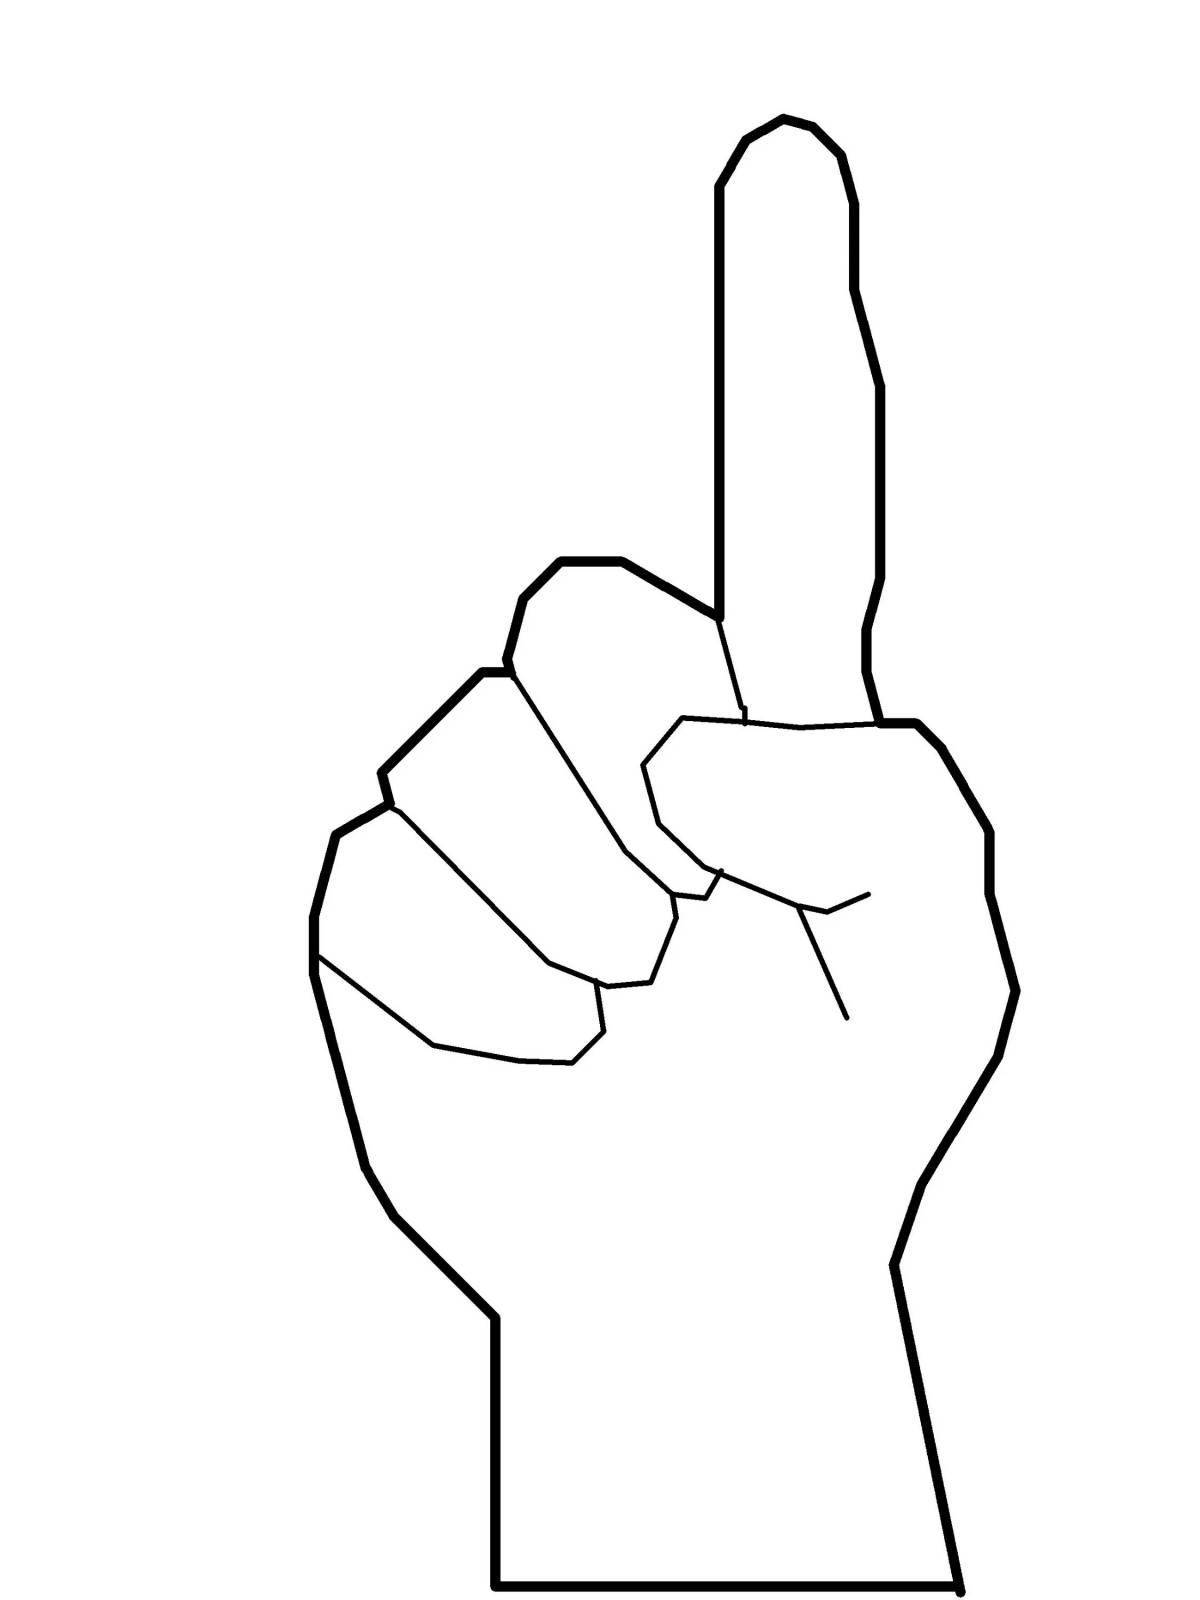 Happy finger coloring page